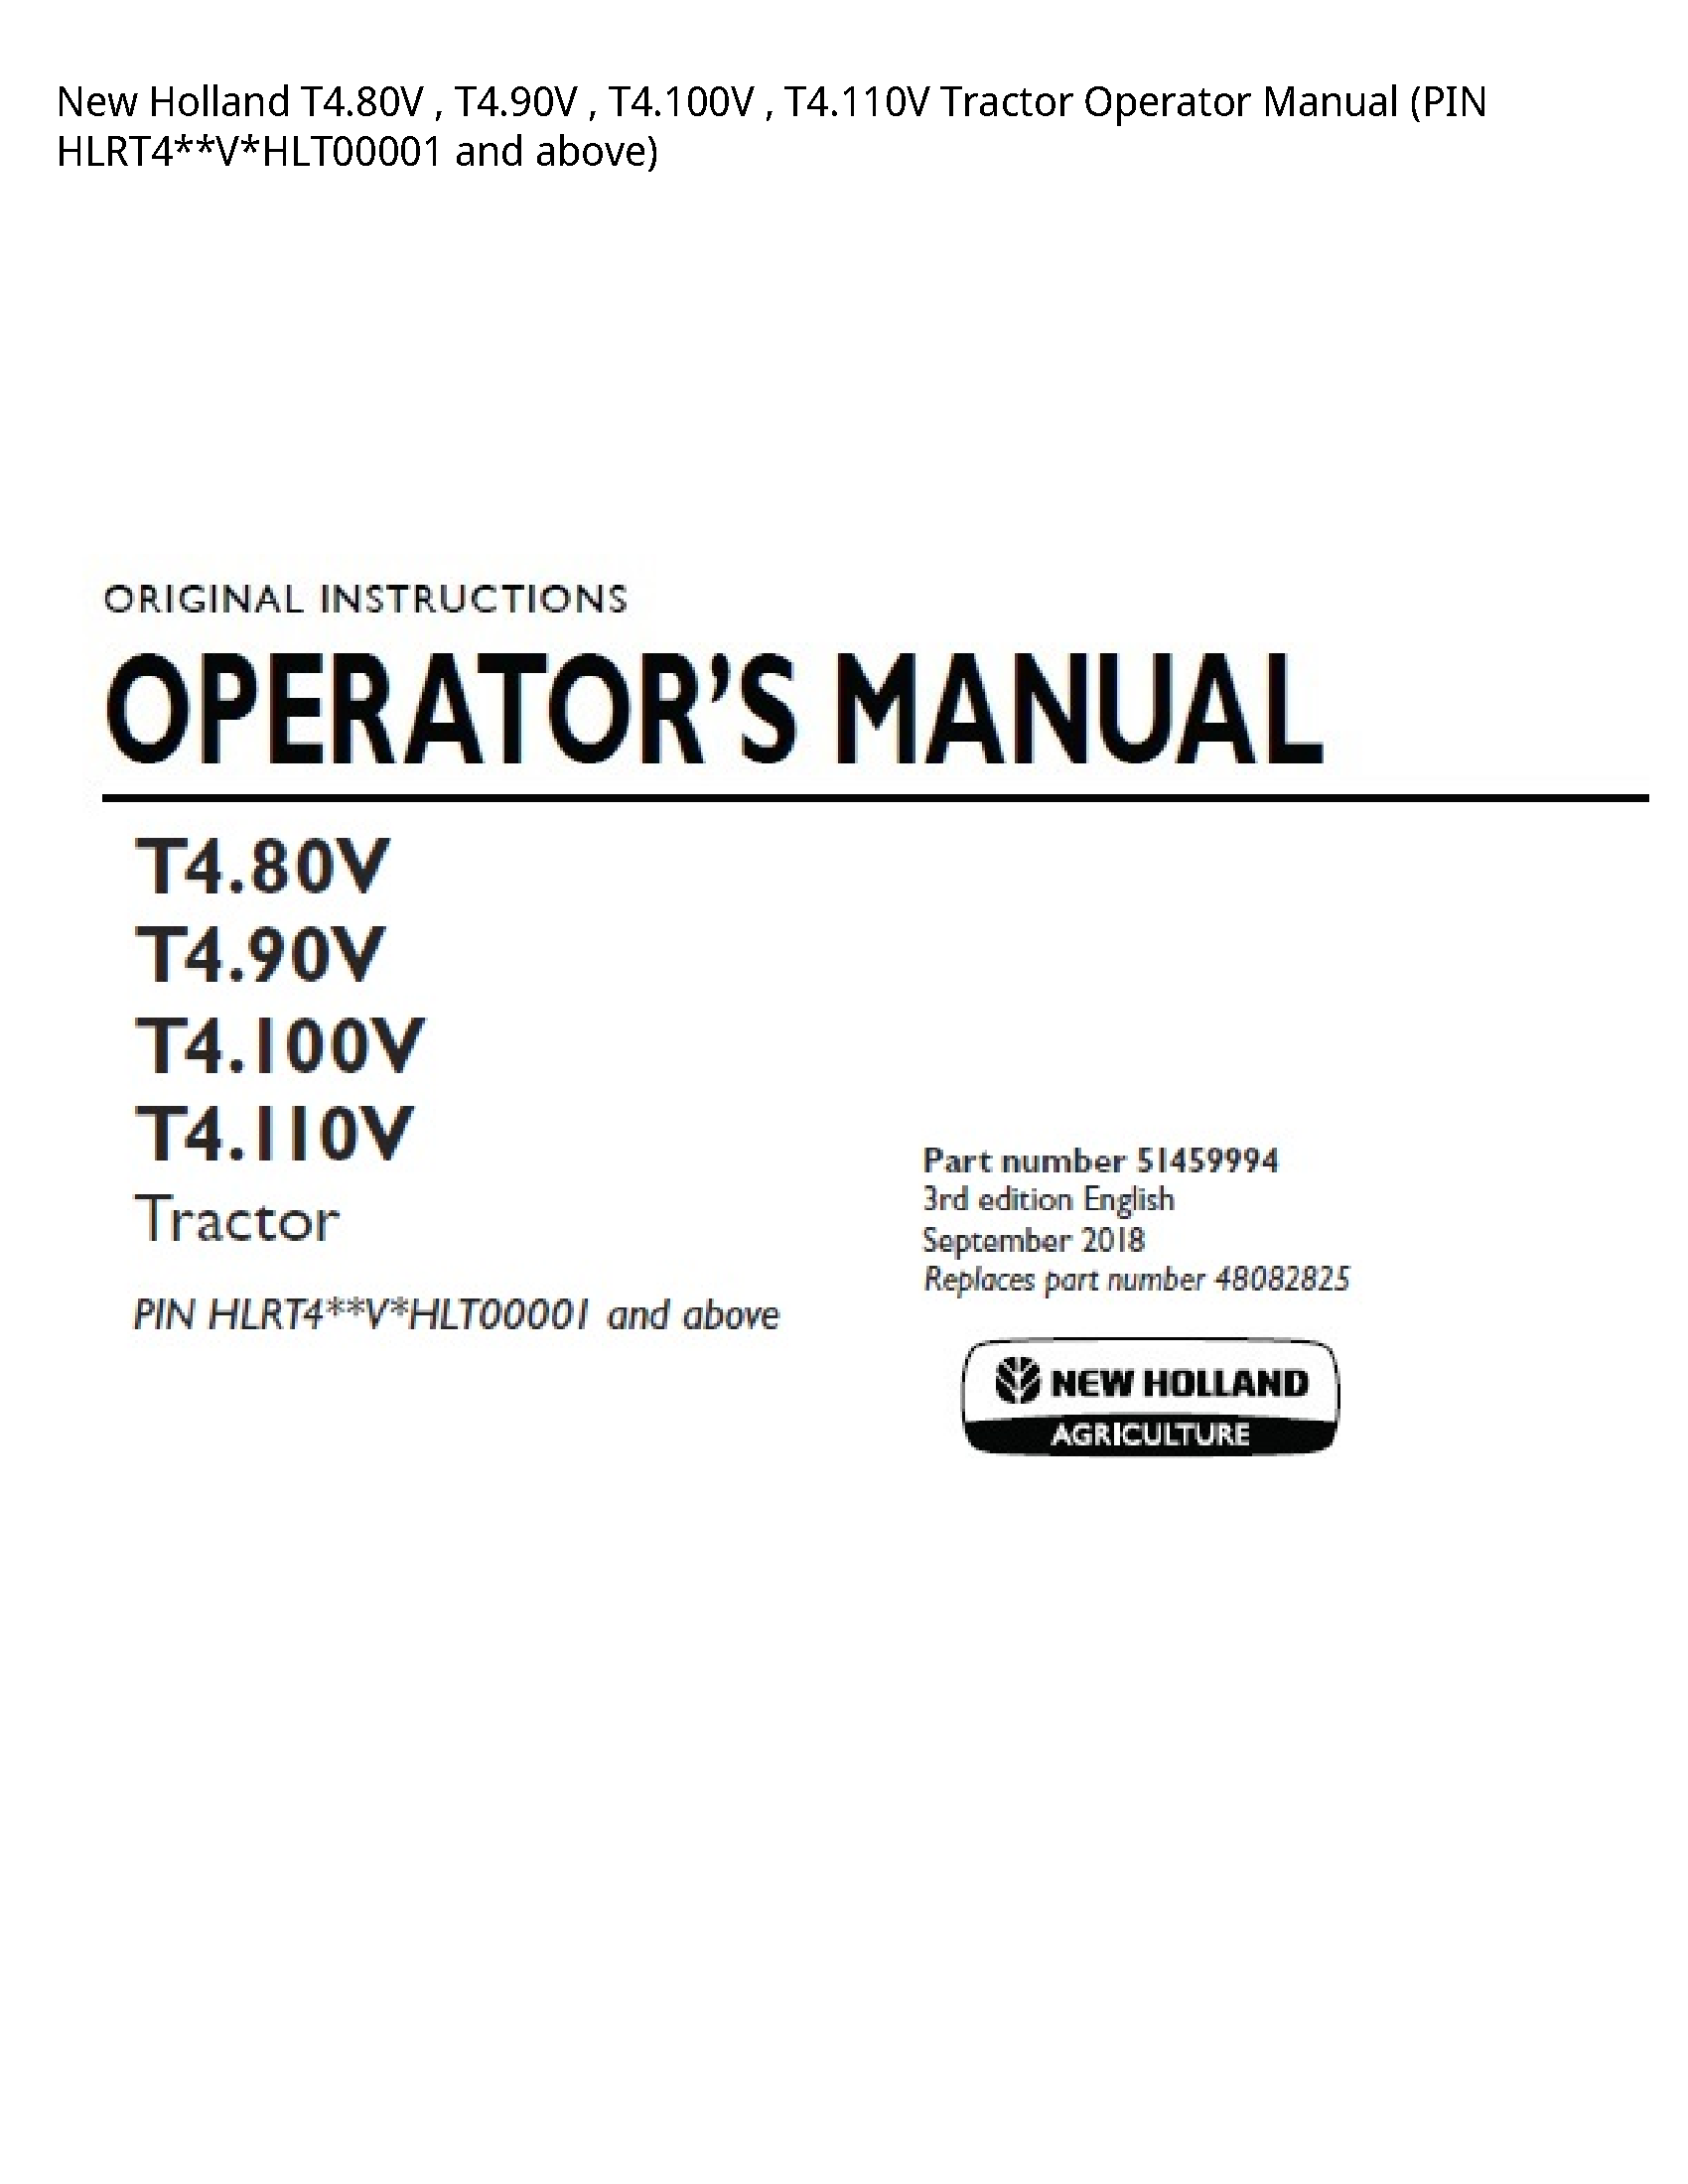 New Holland T4.80V Tractor Operator manual